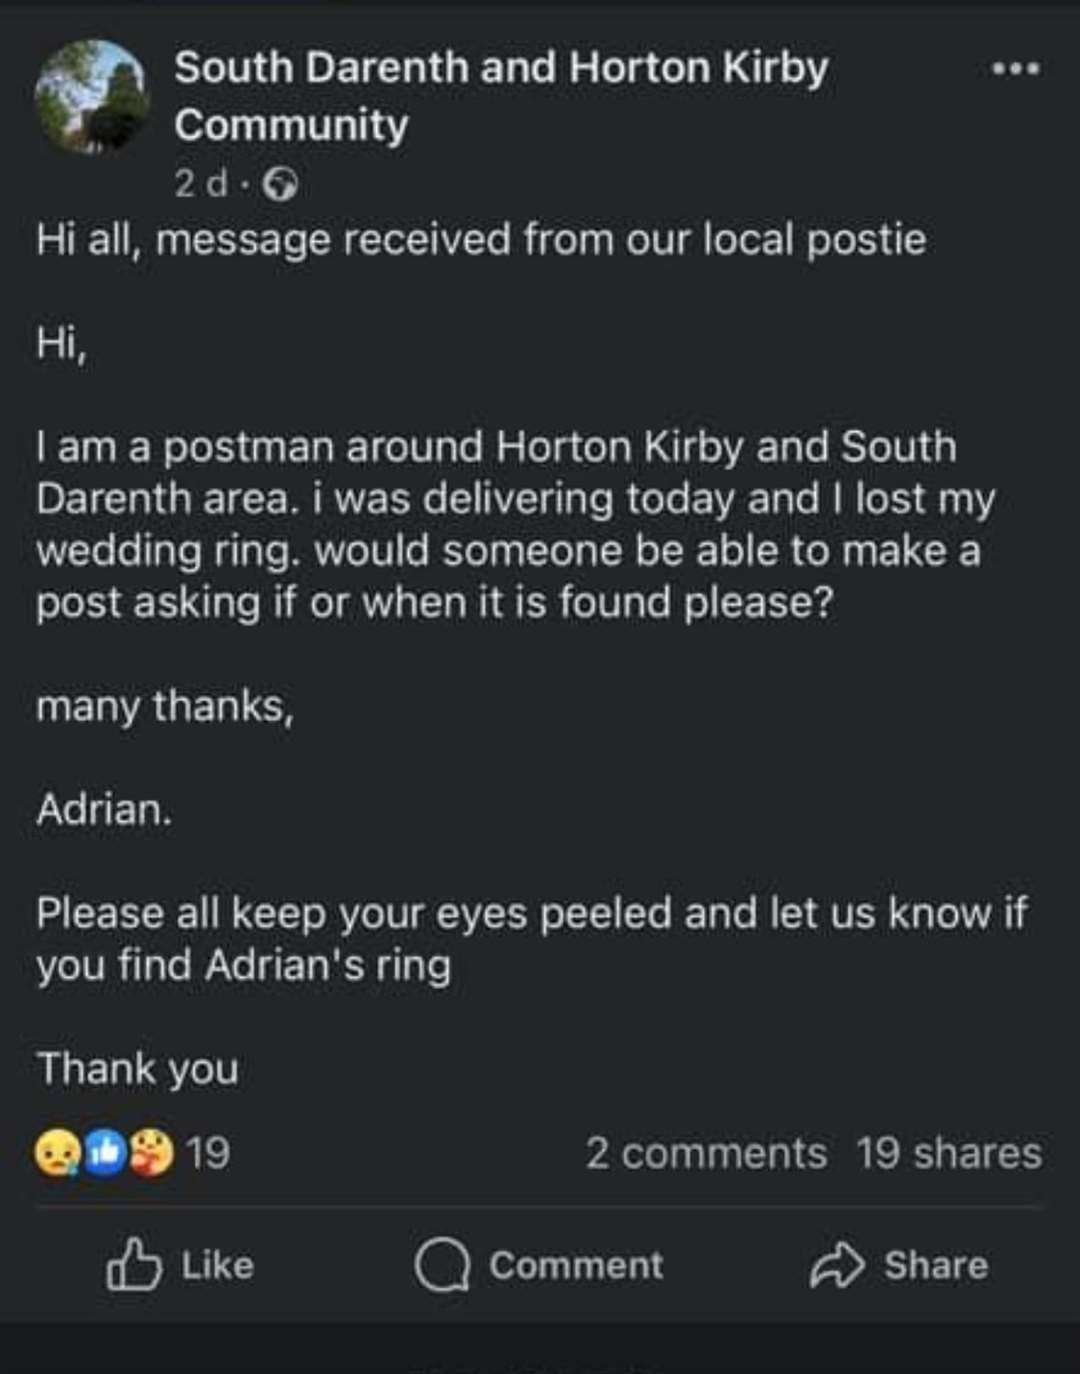 Adrian Moor posted a message on social media in a desperate bid to find his ring